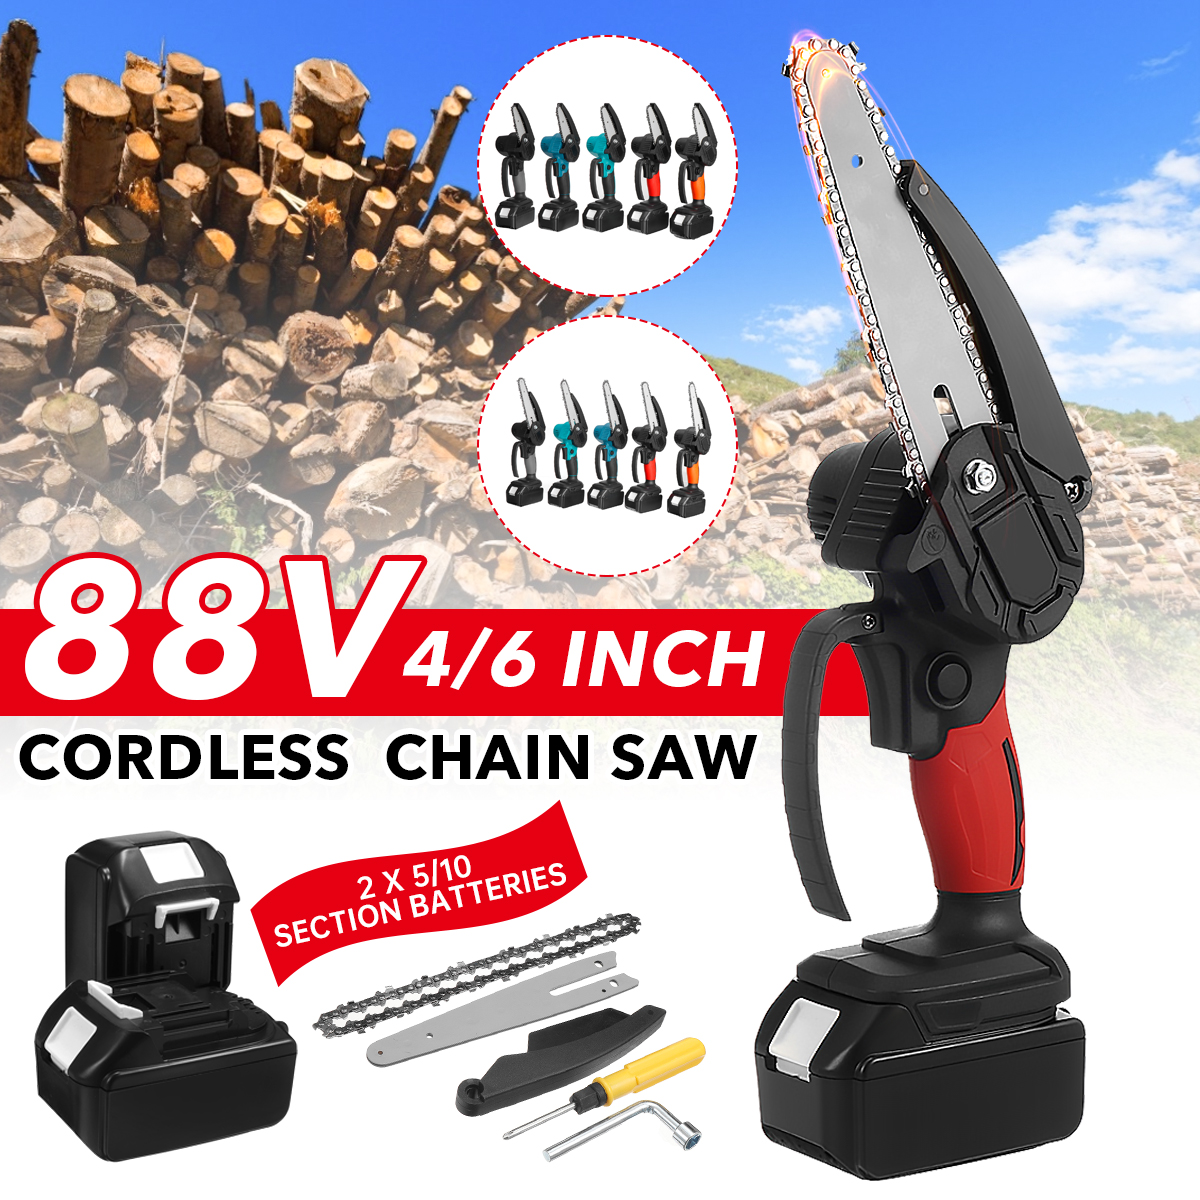 88VF-46-Inch-Cordless-Electric-Chain-Saw-Kit-One-Hand-Saw-Mini-Portable-Woodworking-Wood-Cutter-W-2p-1880983-2